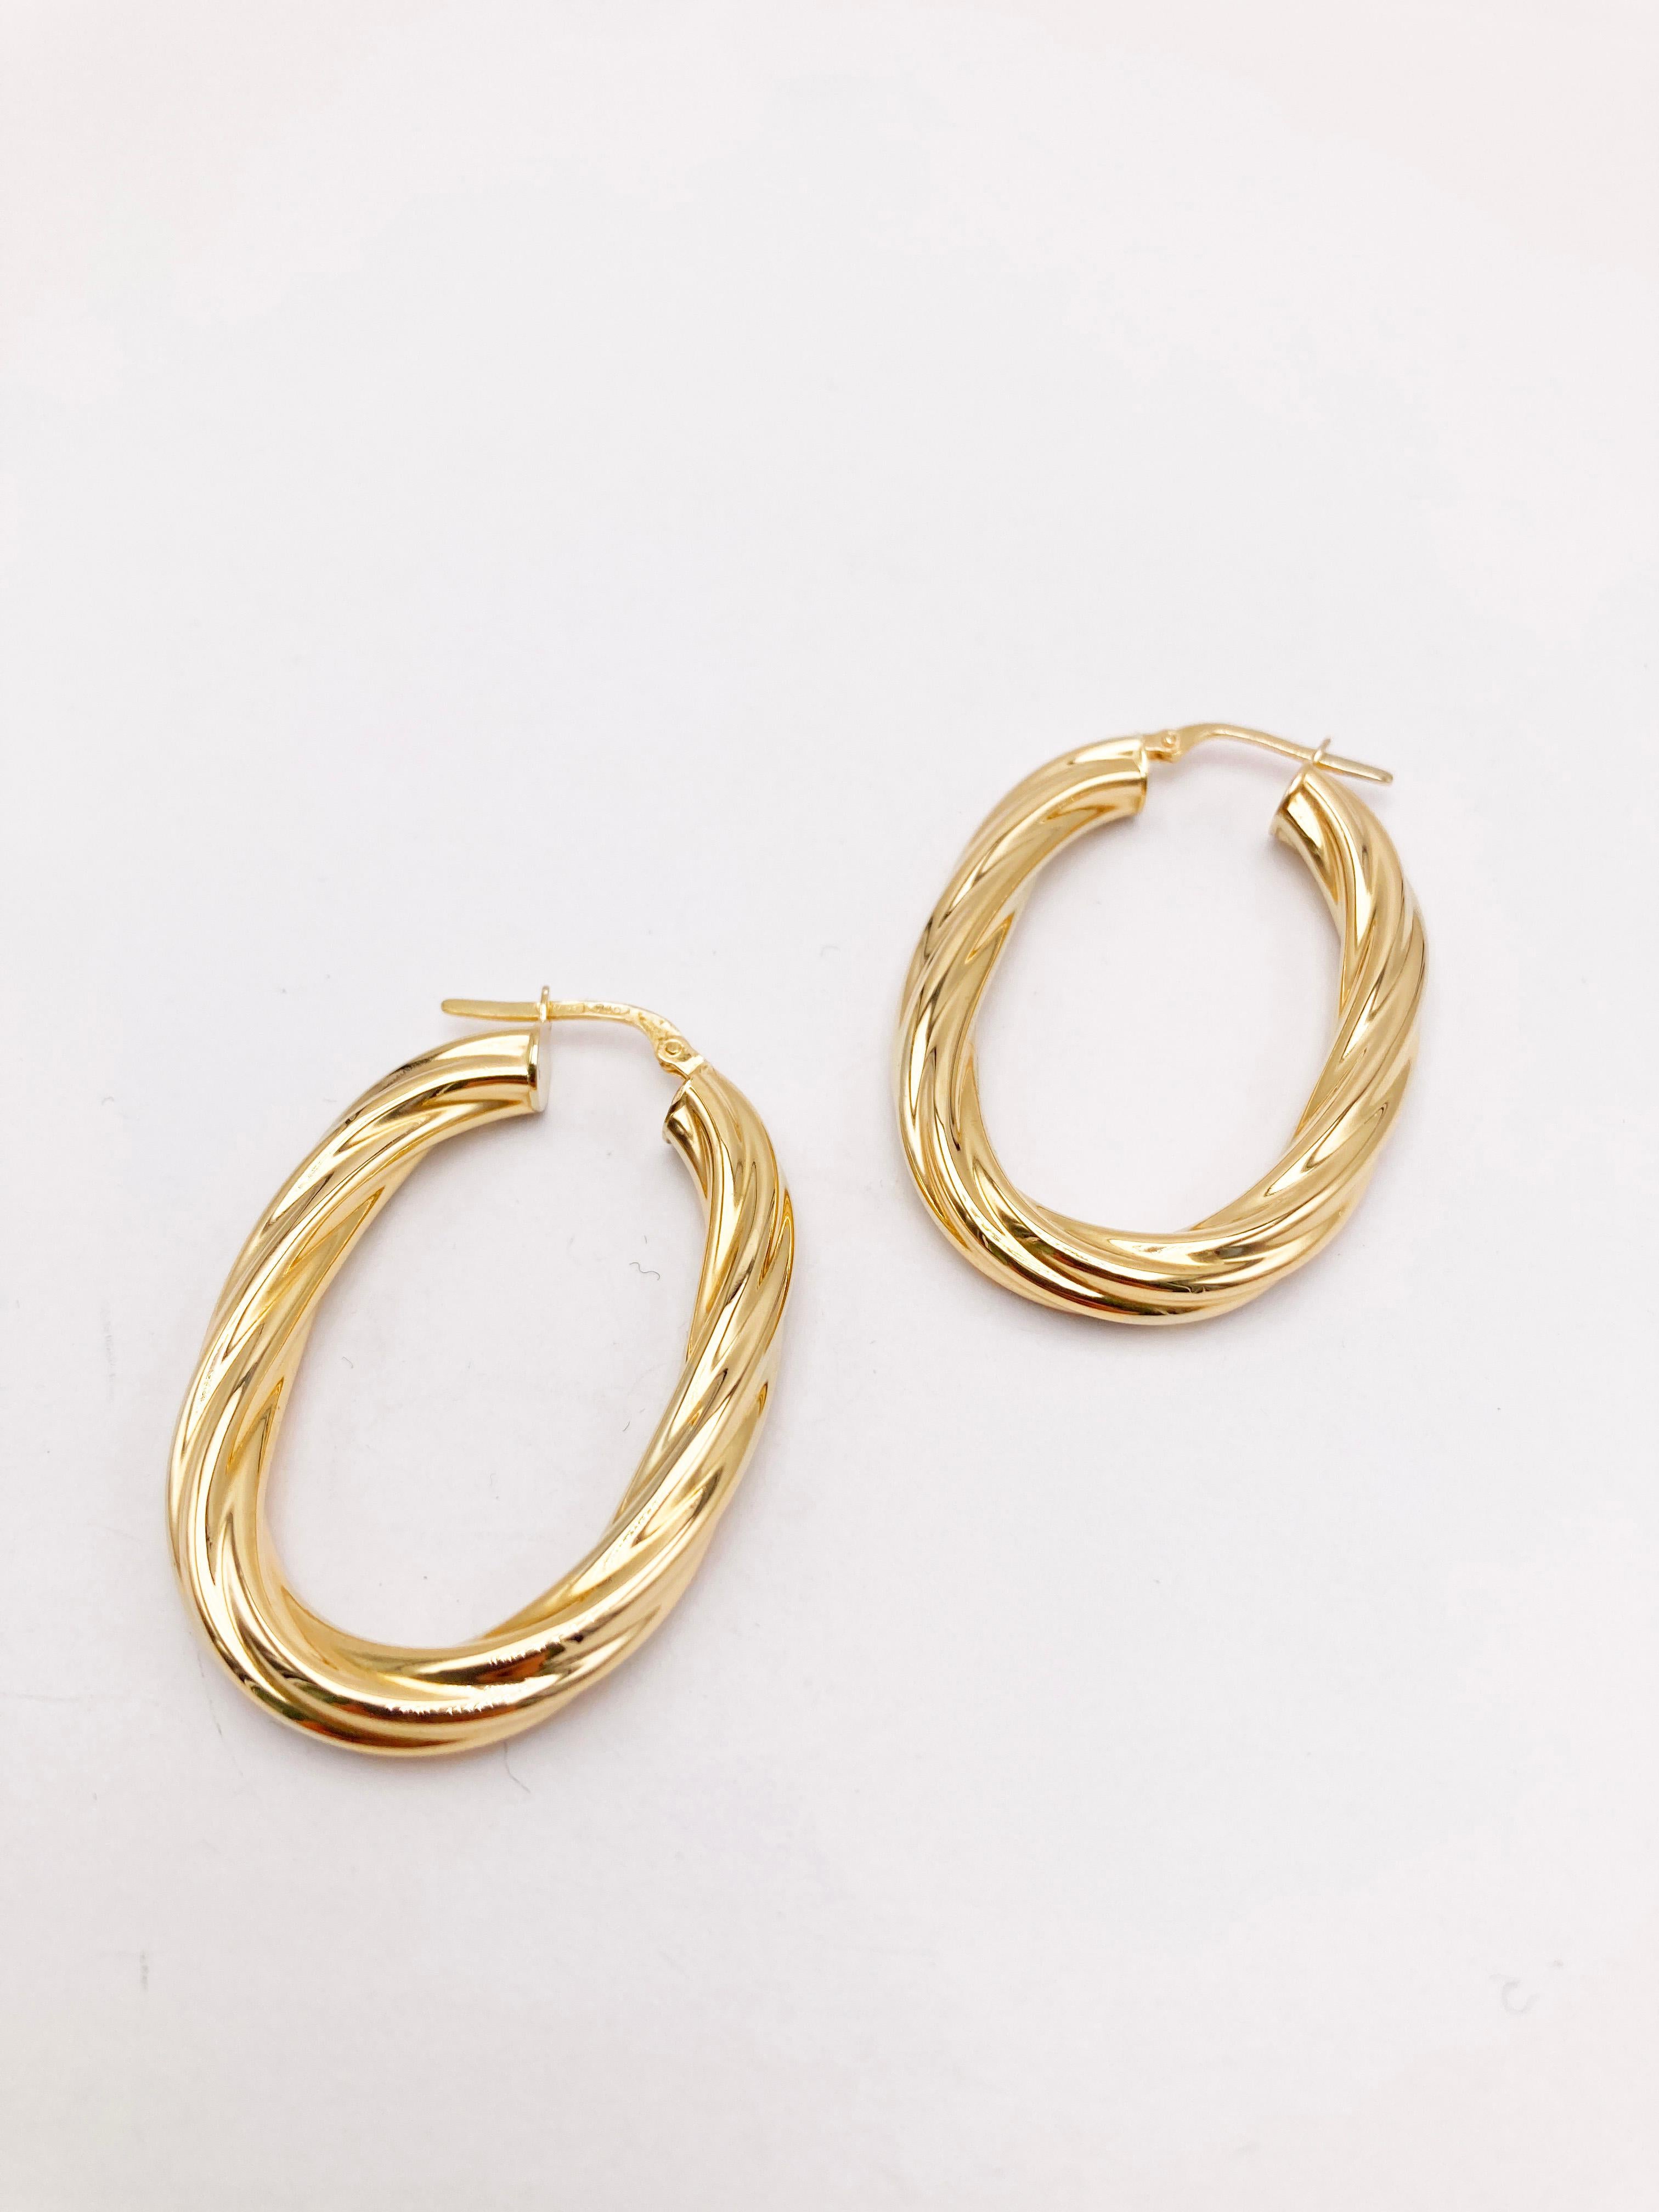 Revival 18K Yellow Gold Hoops Earrings circa 1980 For Sale 4